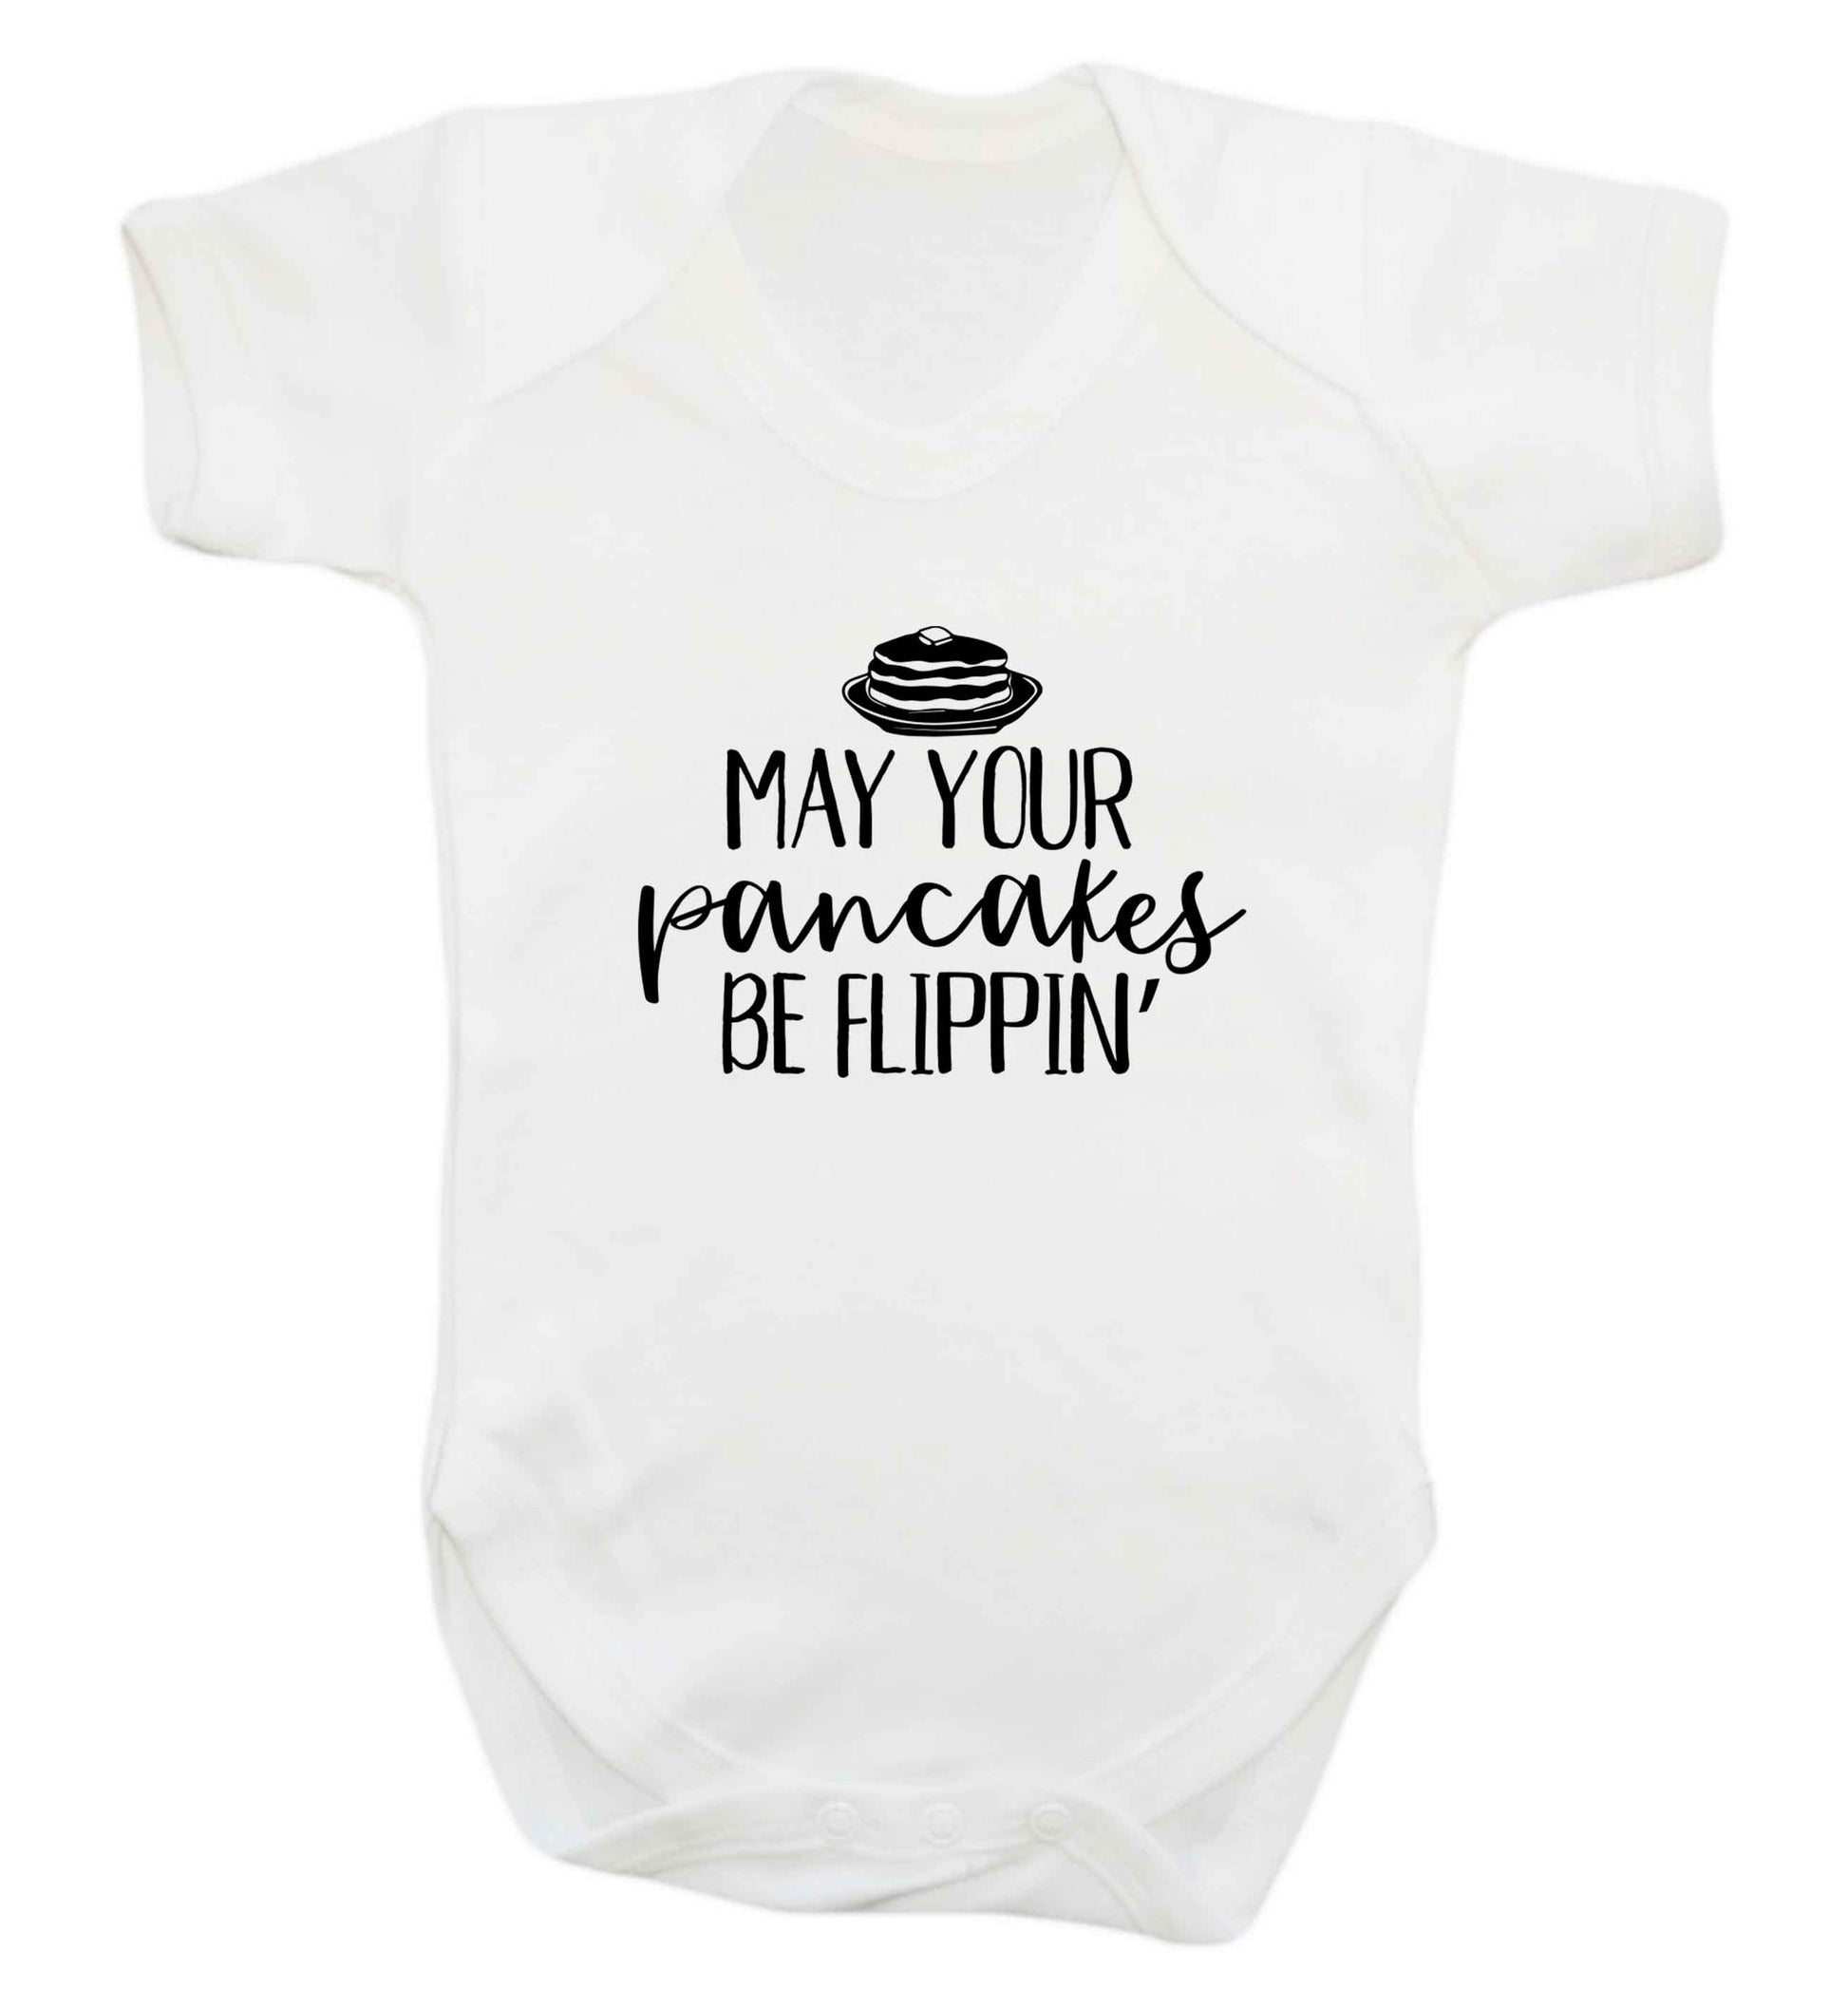 May your pancakes be flippin' baby vest white 18-24 months